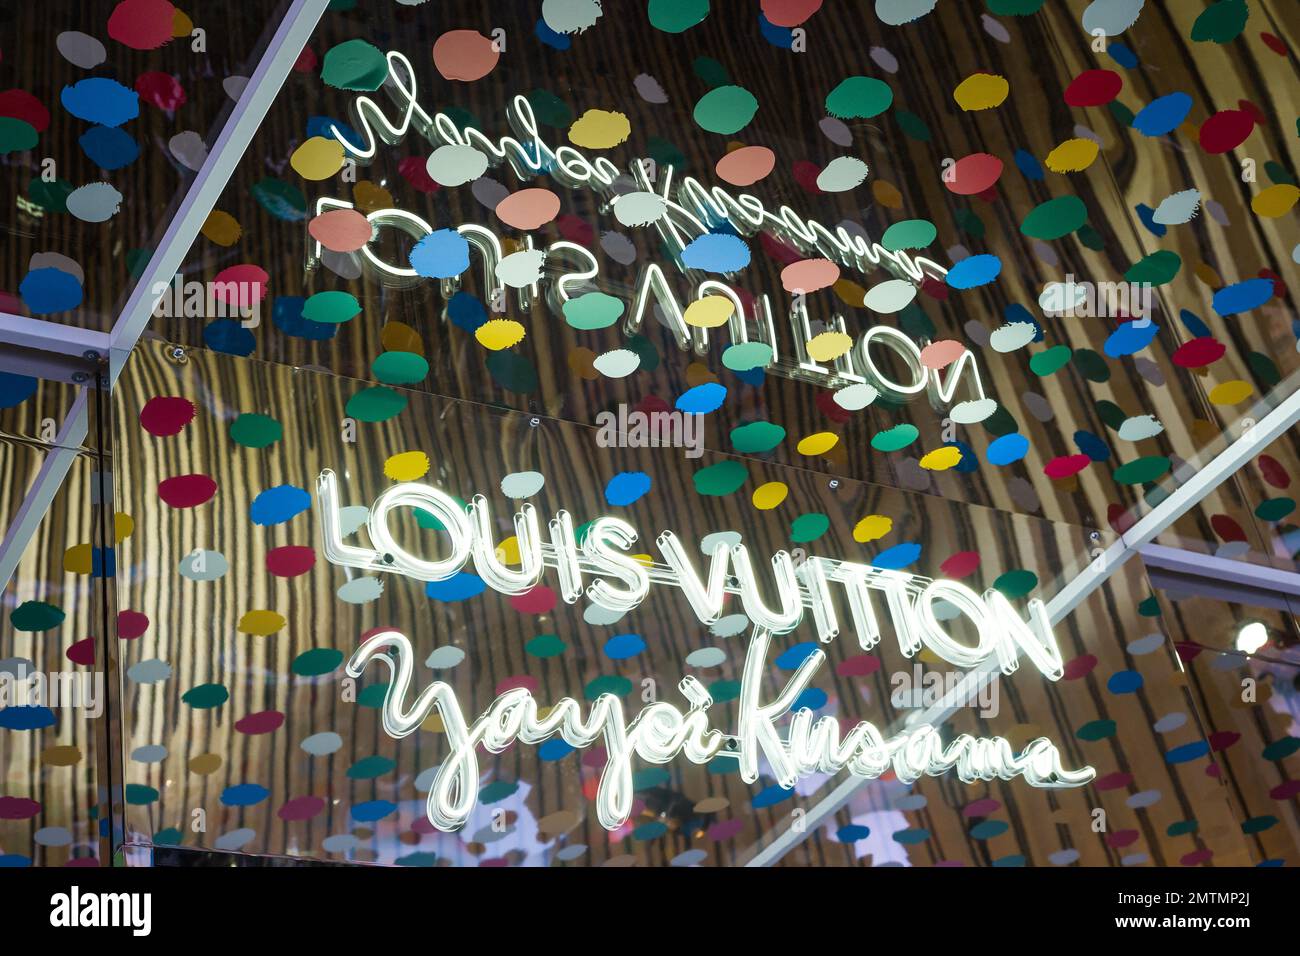 Louis Vuitton Outlet On Champs Elysees In Paris - France Stock Photo,  Picture and Royalty Free Image. Image 22948494.